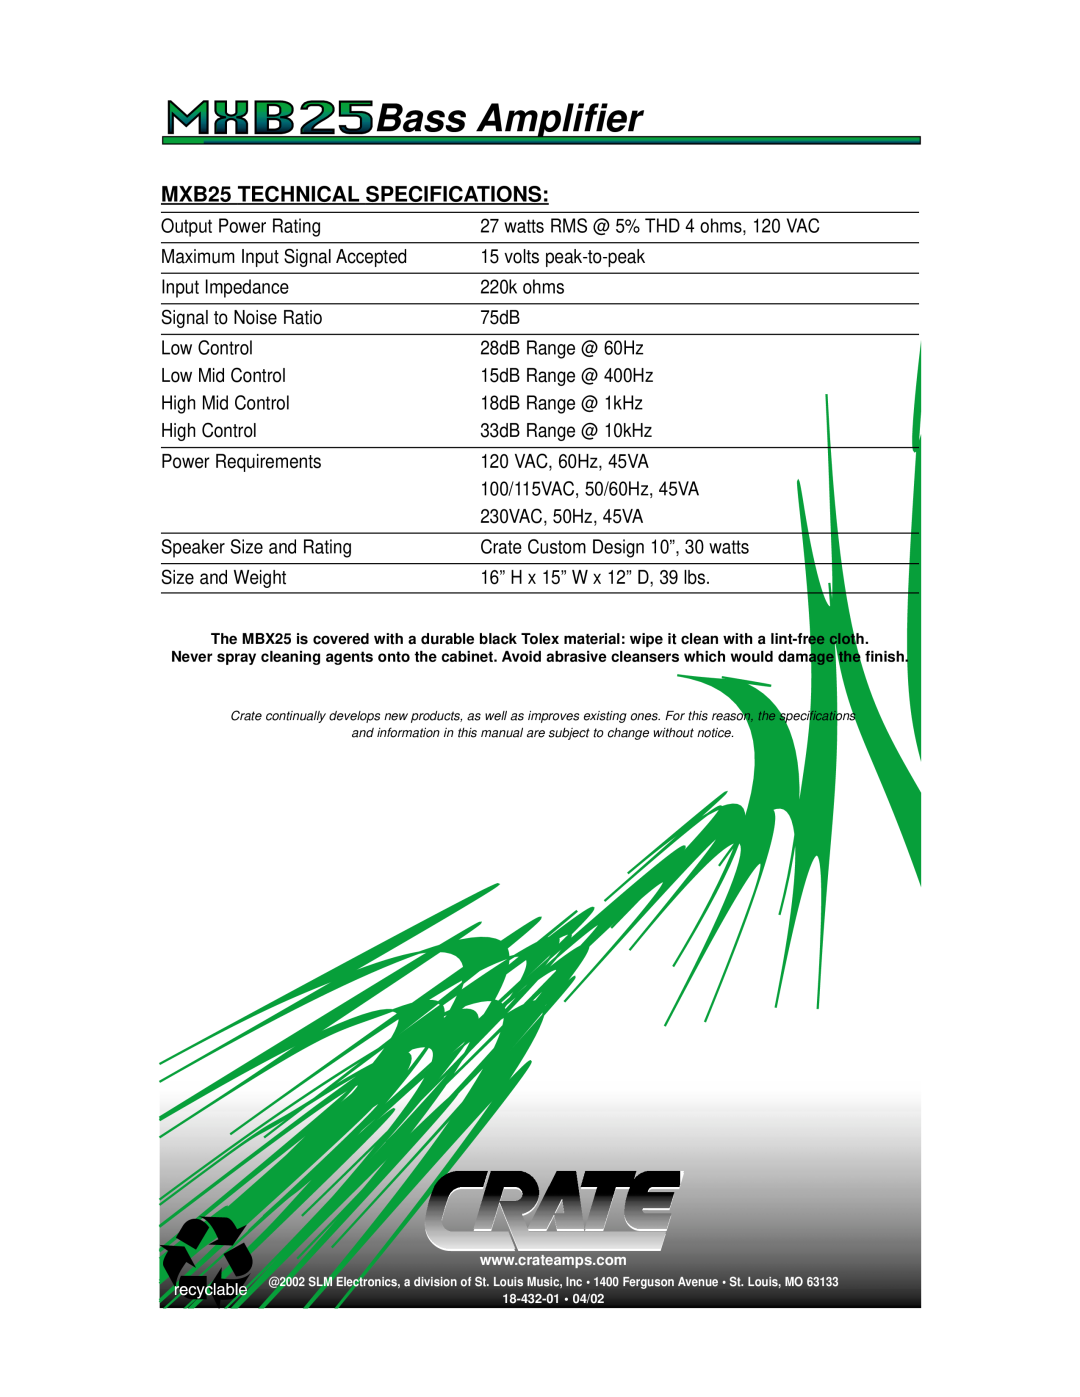 Crate Amplifiers manual MXB25 TECHNICAL SPECIFICATIONS, Bass Amplifier 